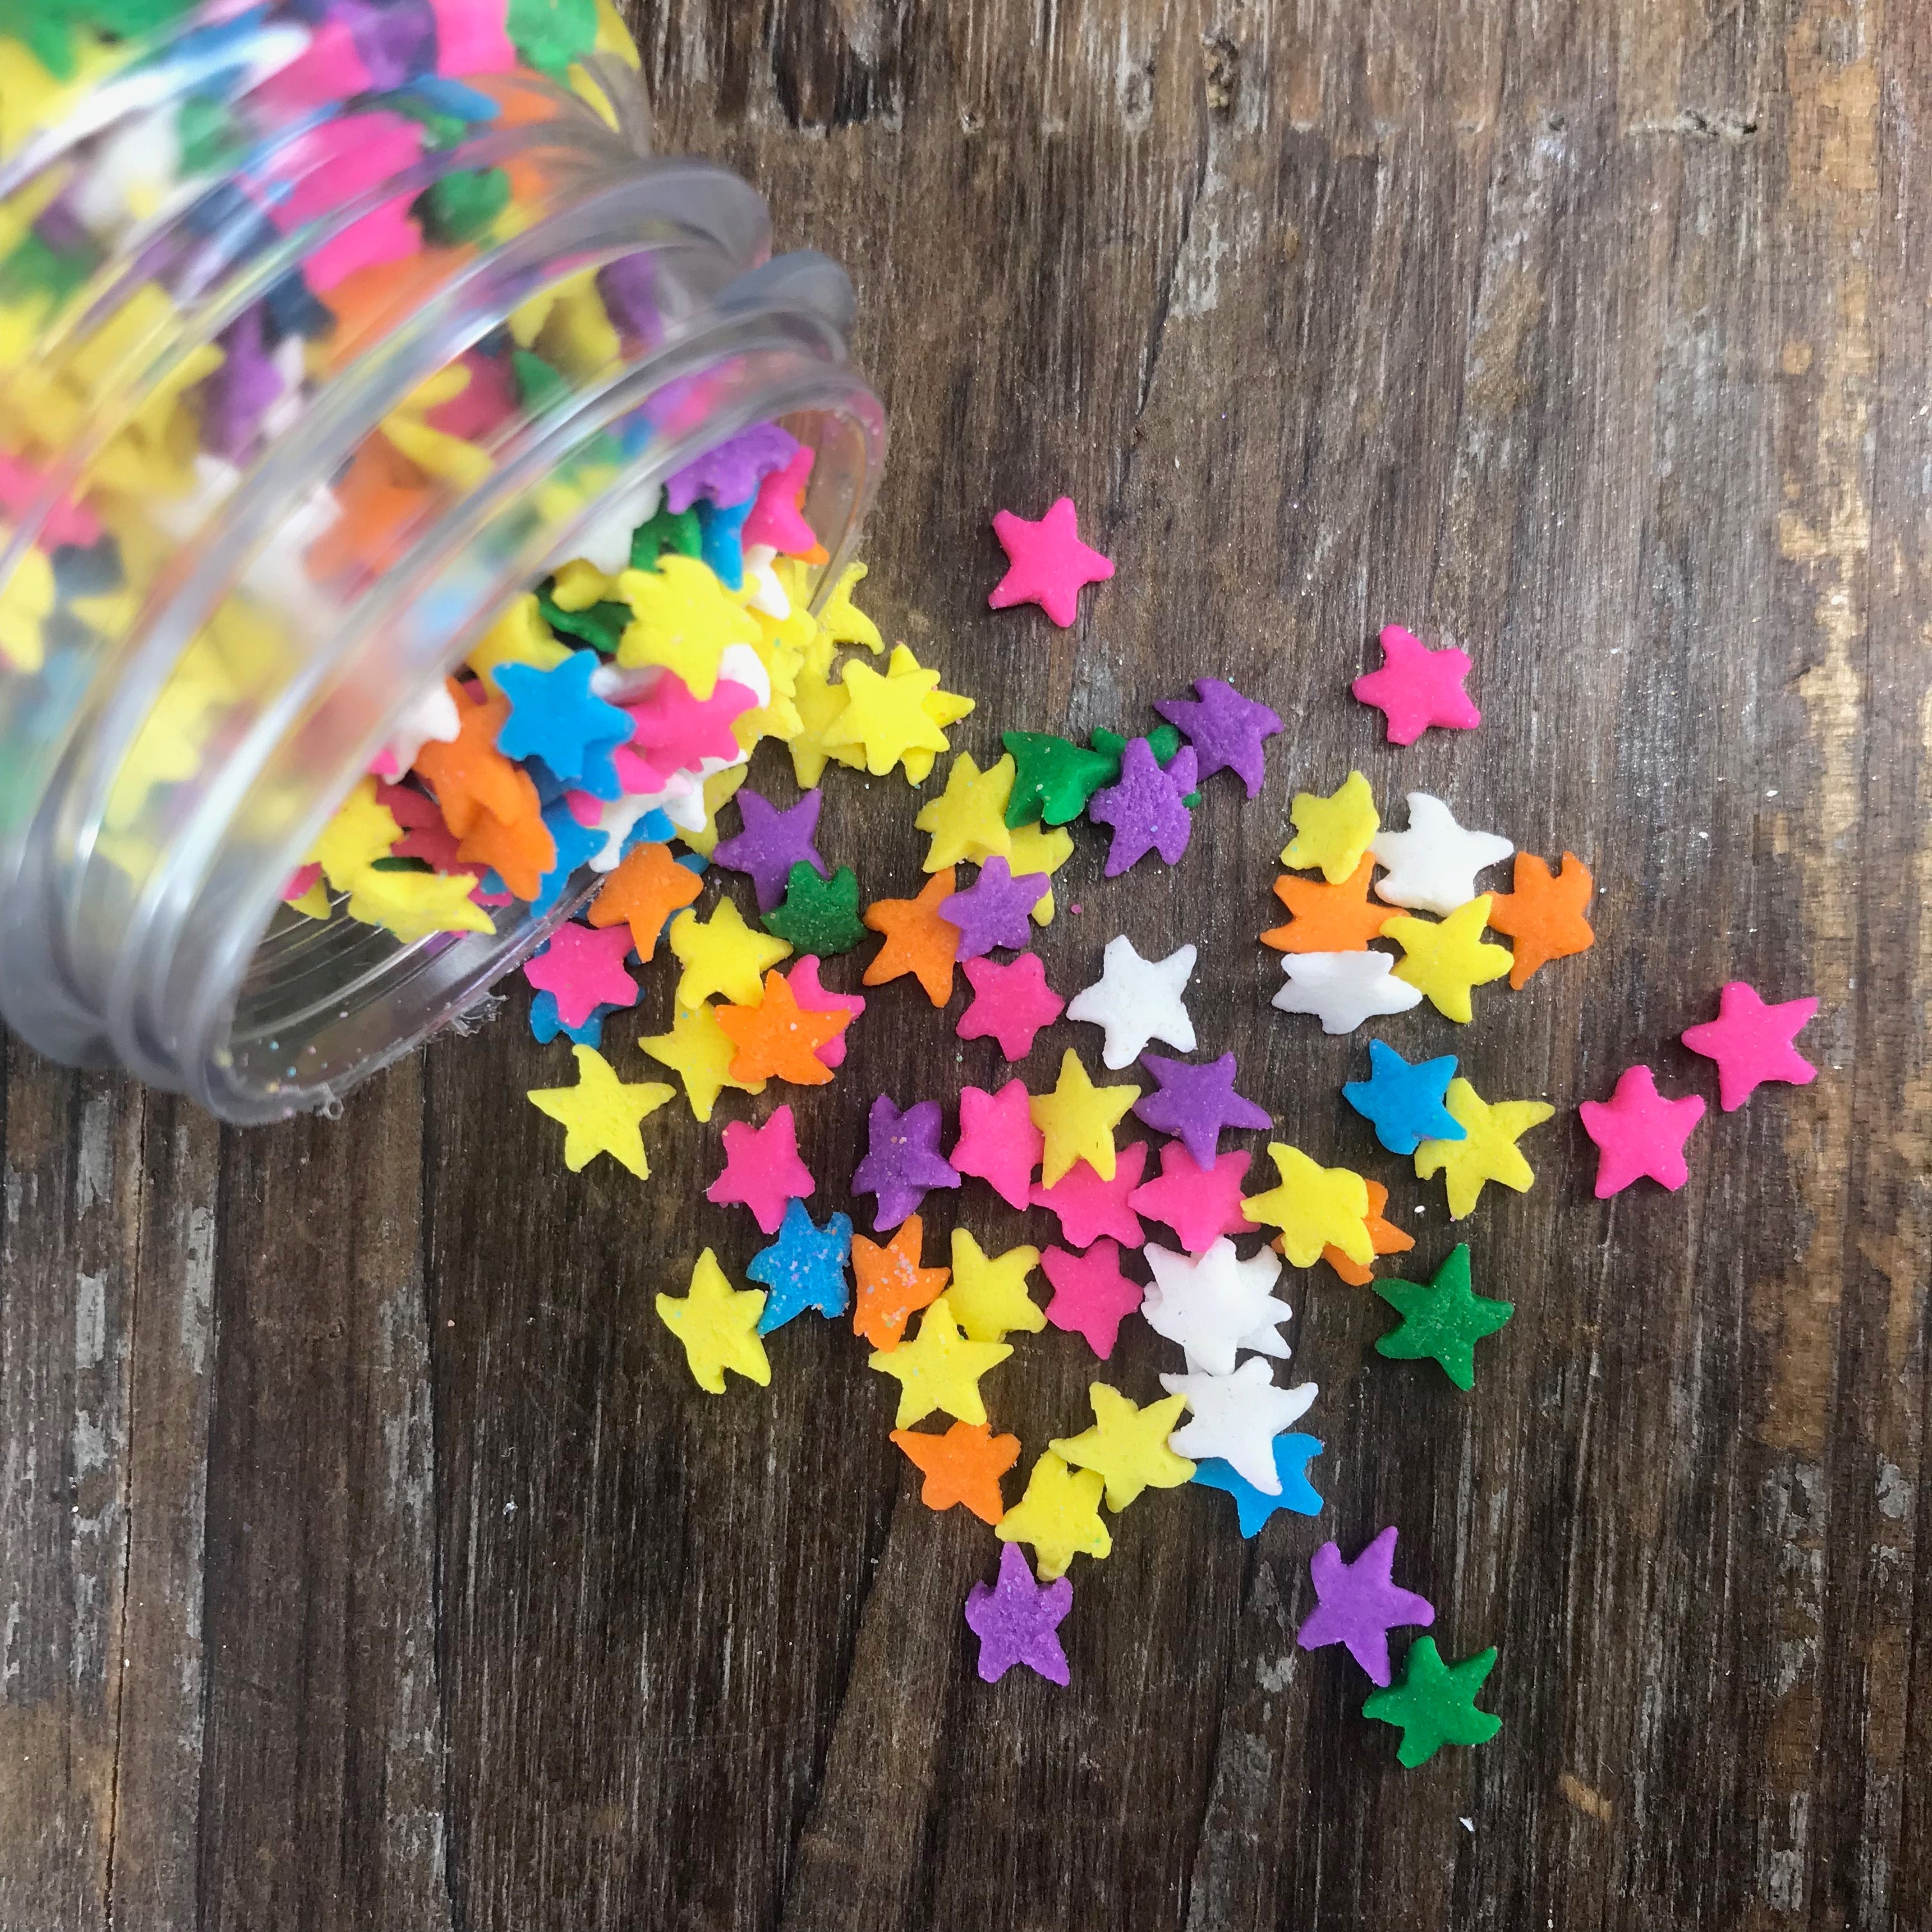 Colorful Star Glitter Fun Food Sprinkles© by Never Forgotten Designs